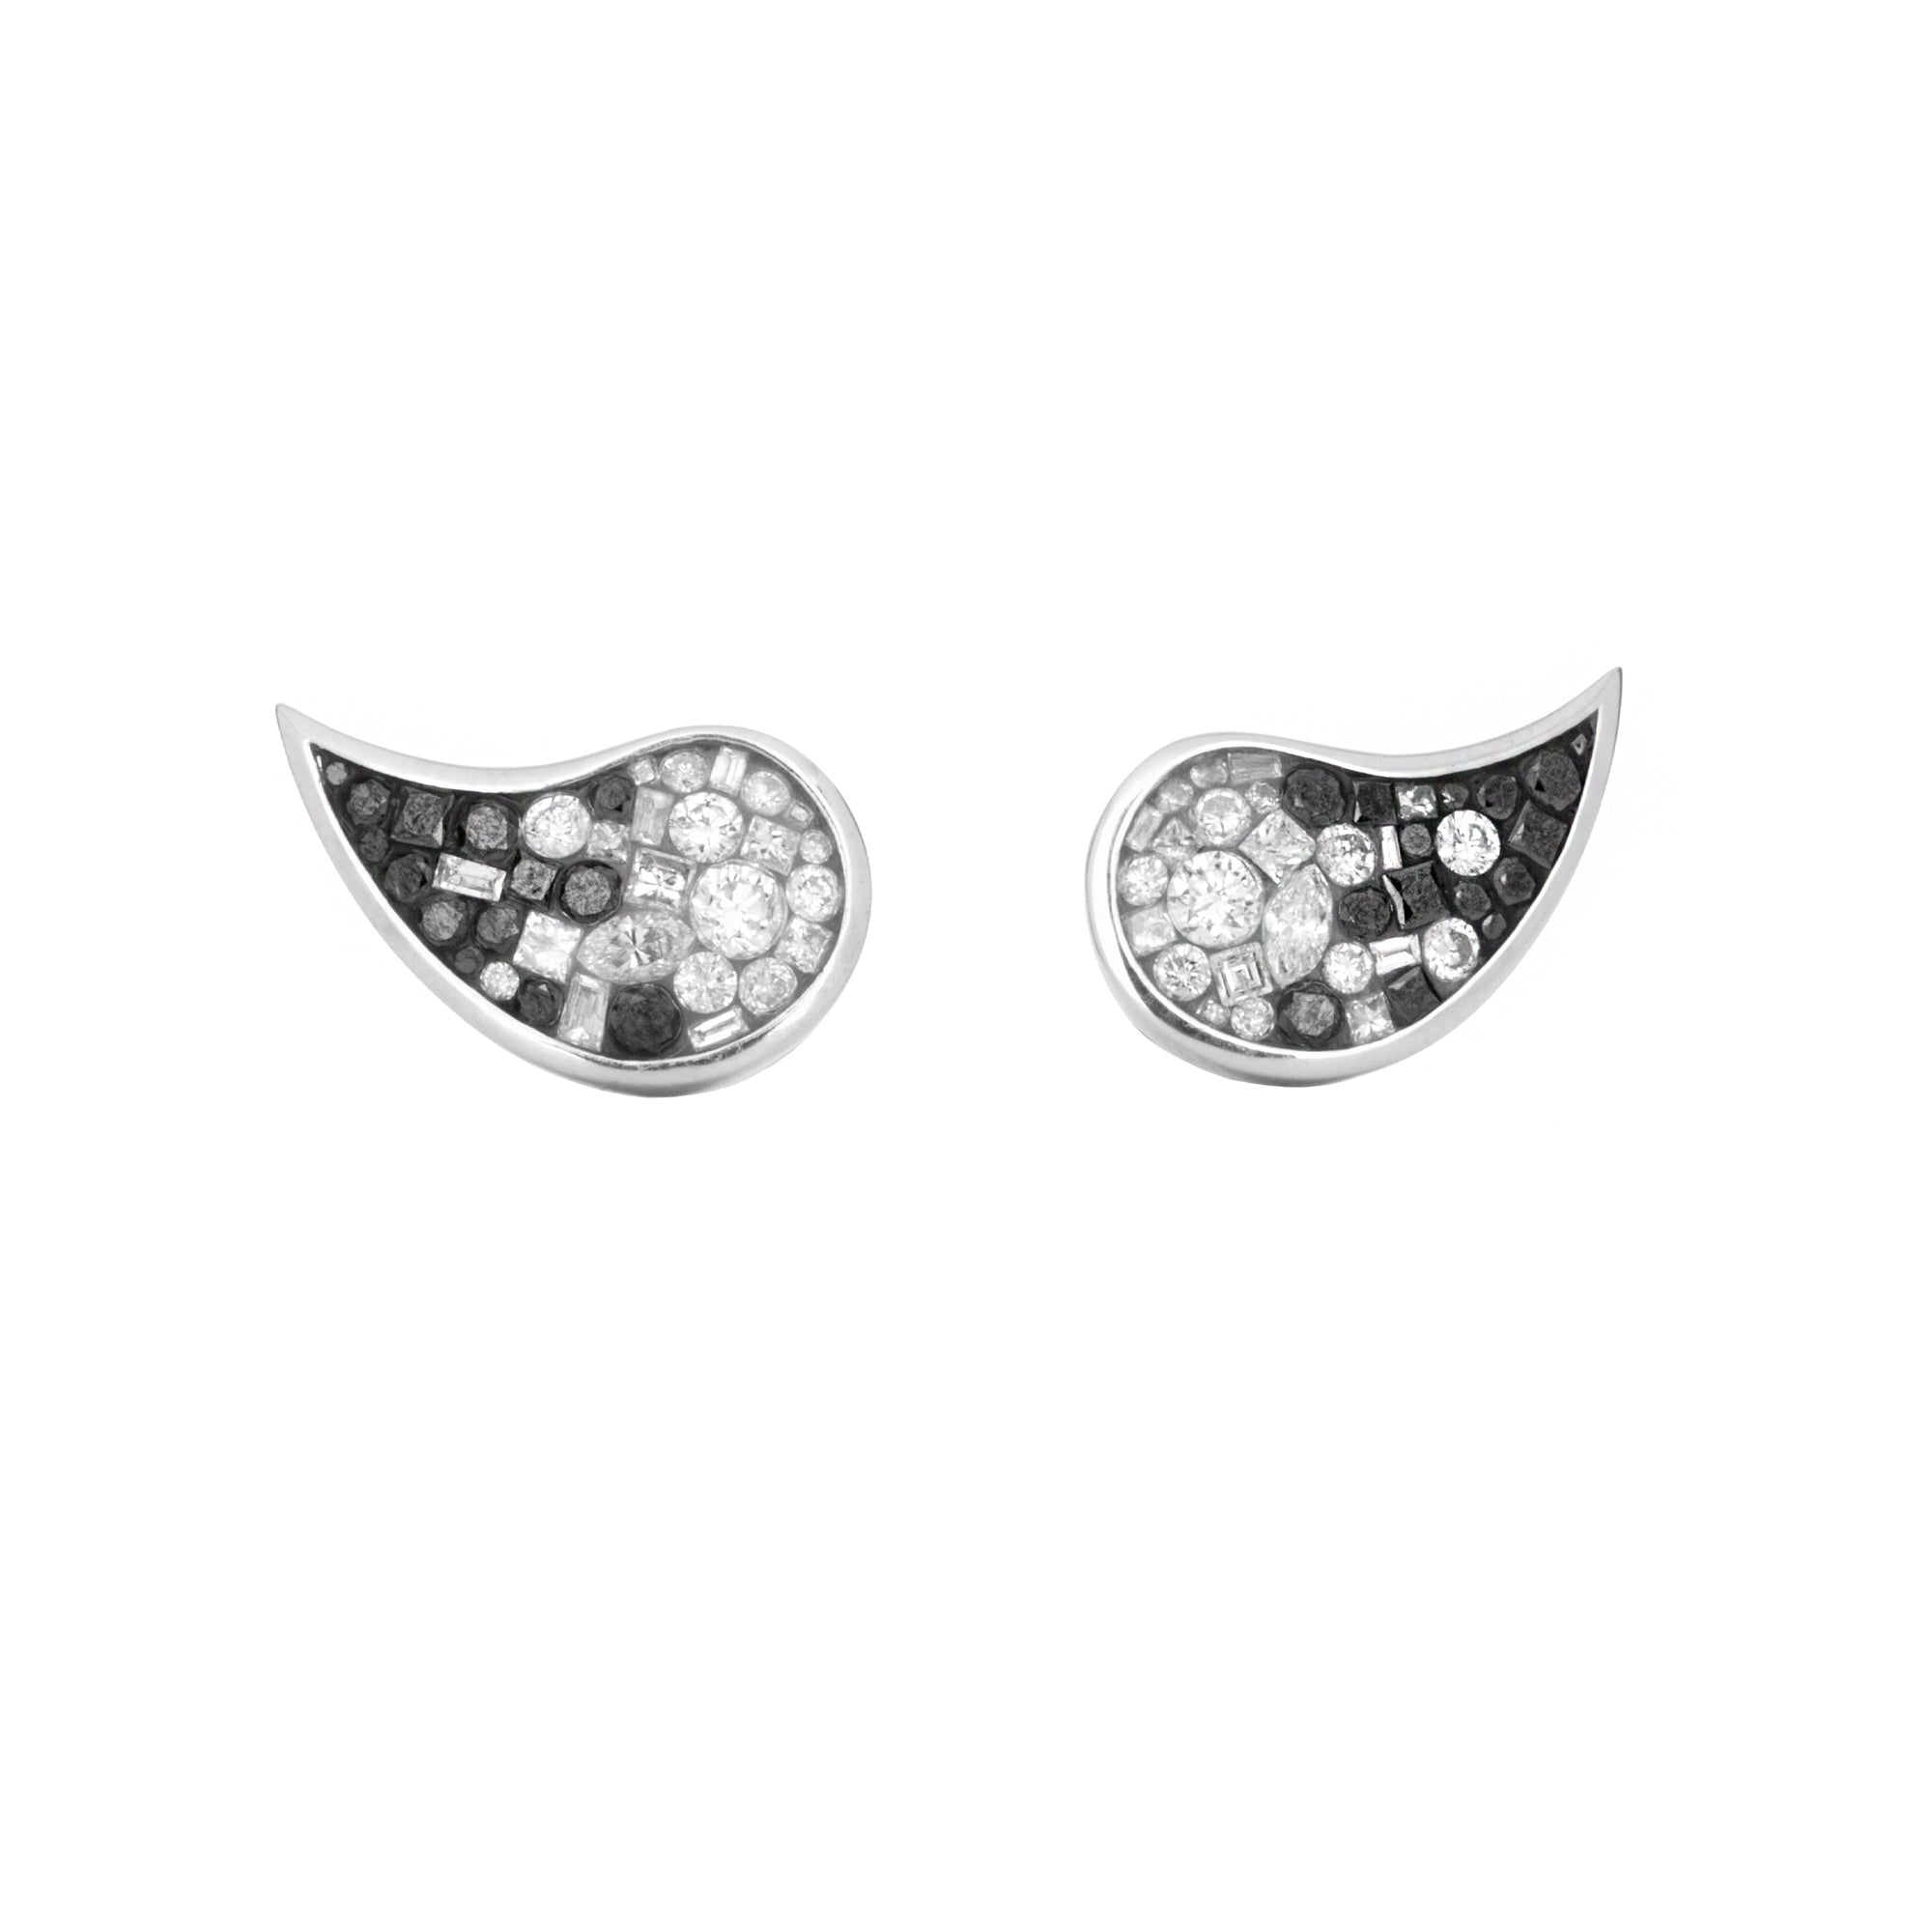 Black Ombre Paisley Diamond Stud Earrings by Pleve available at Talisman Collection Fine Jewelers in El Dorado Hills, CA and online. 